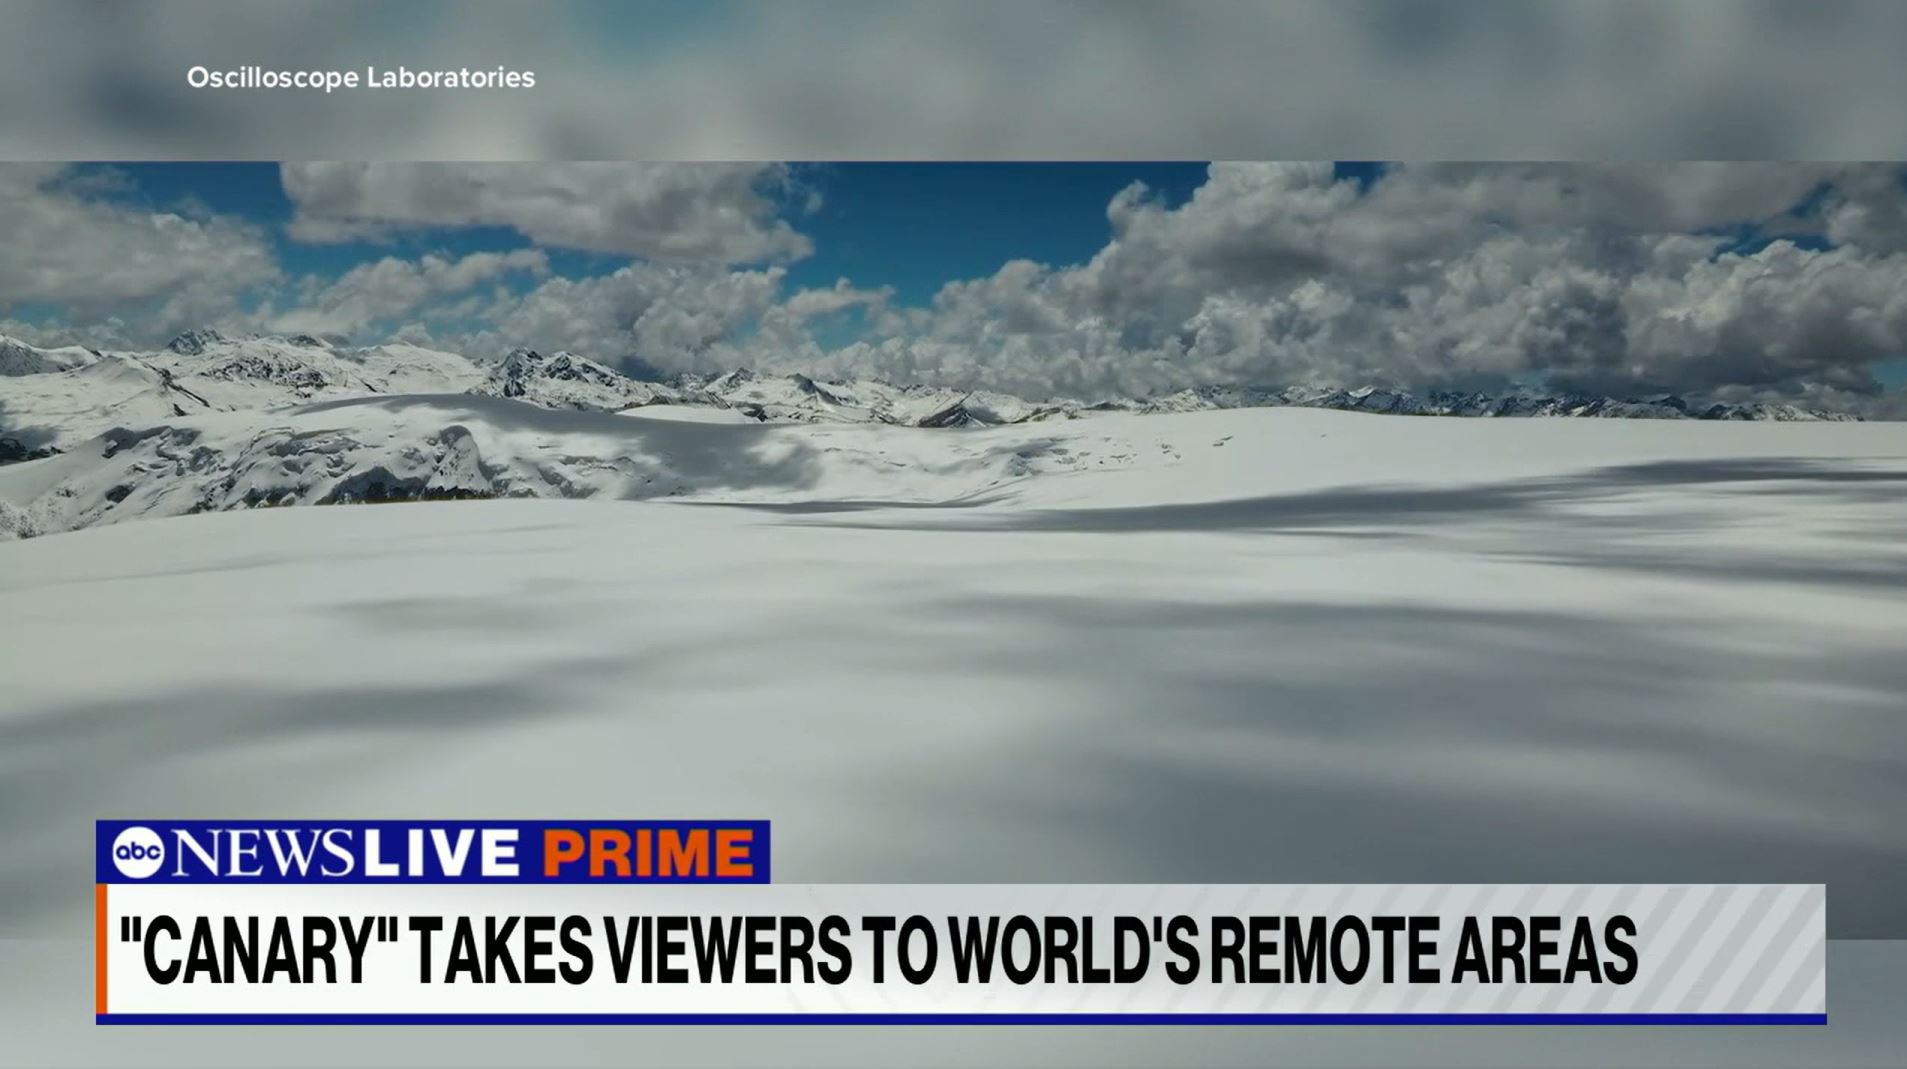 screenshot of a snow covered vista with blue skies and white clouds and text. At the top text states  Oscilloscope  Laboratories. A text block at the bottom has the ABC logo and News Live Prime "Canary" takes viewers to world's remote areas.